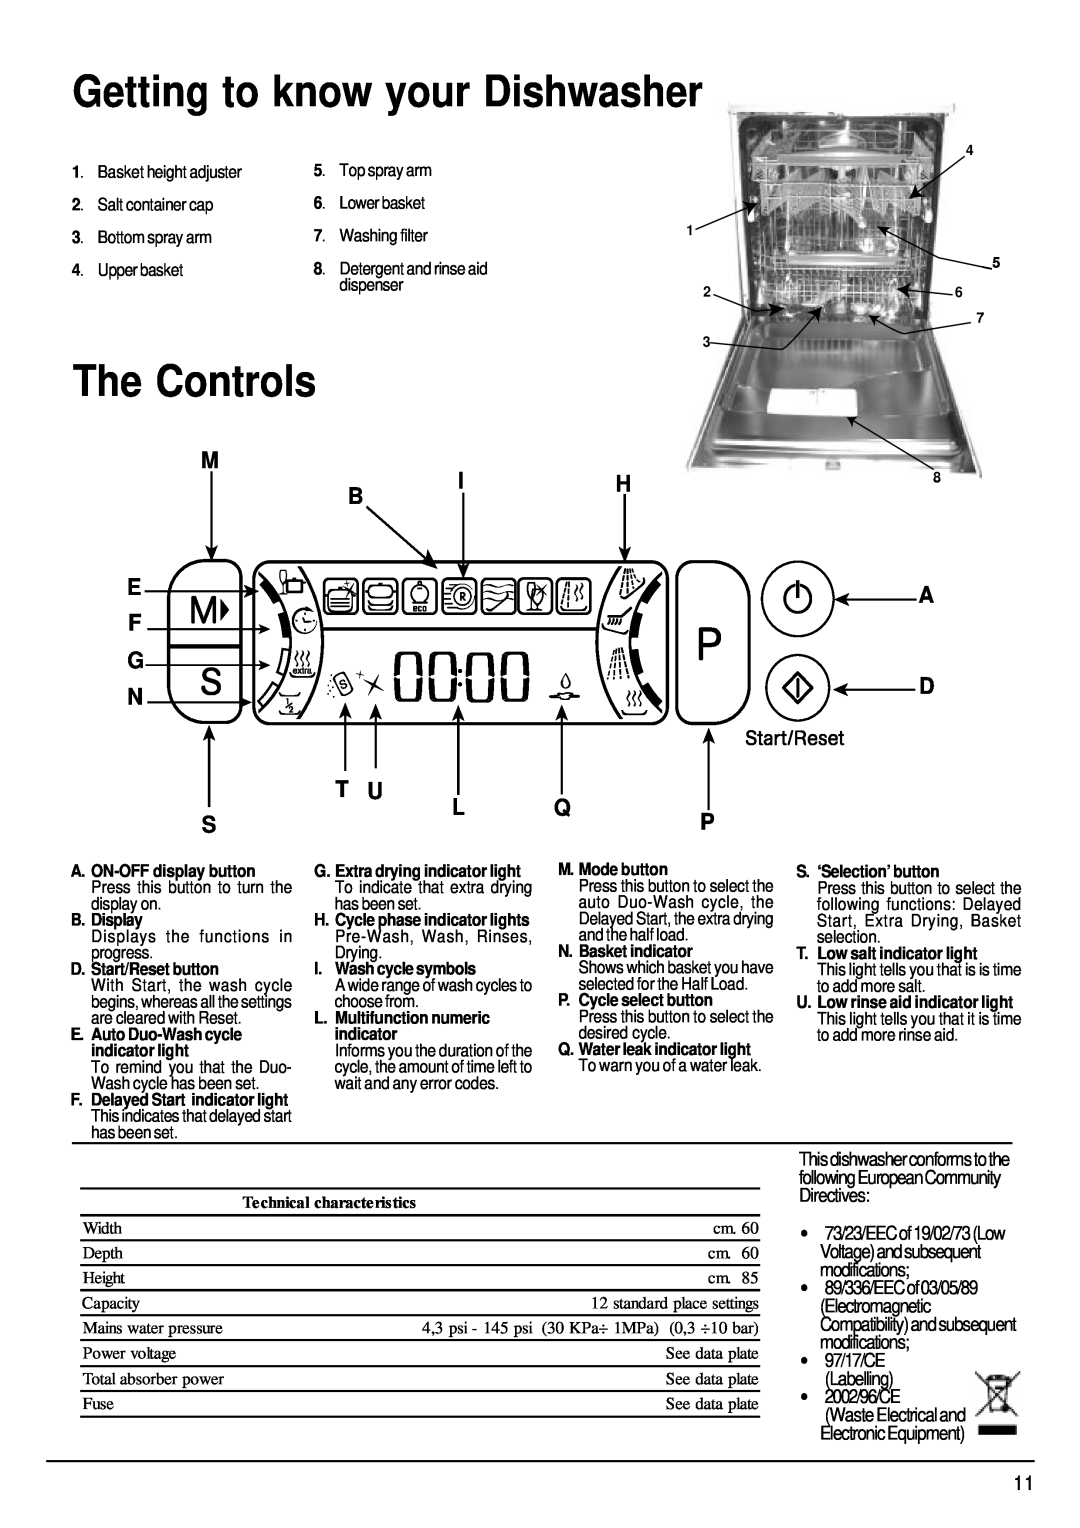 Hotpoint ULTIMA manual Getting to know your Dishwasher, The Controls, M B E F G N, A. ON-OFF display button, B. Display 